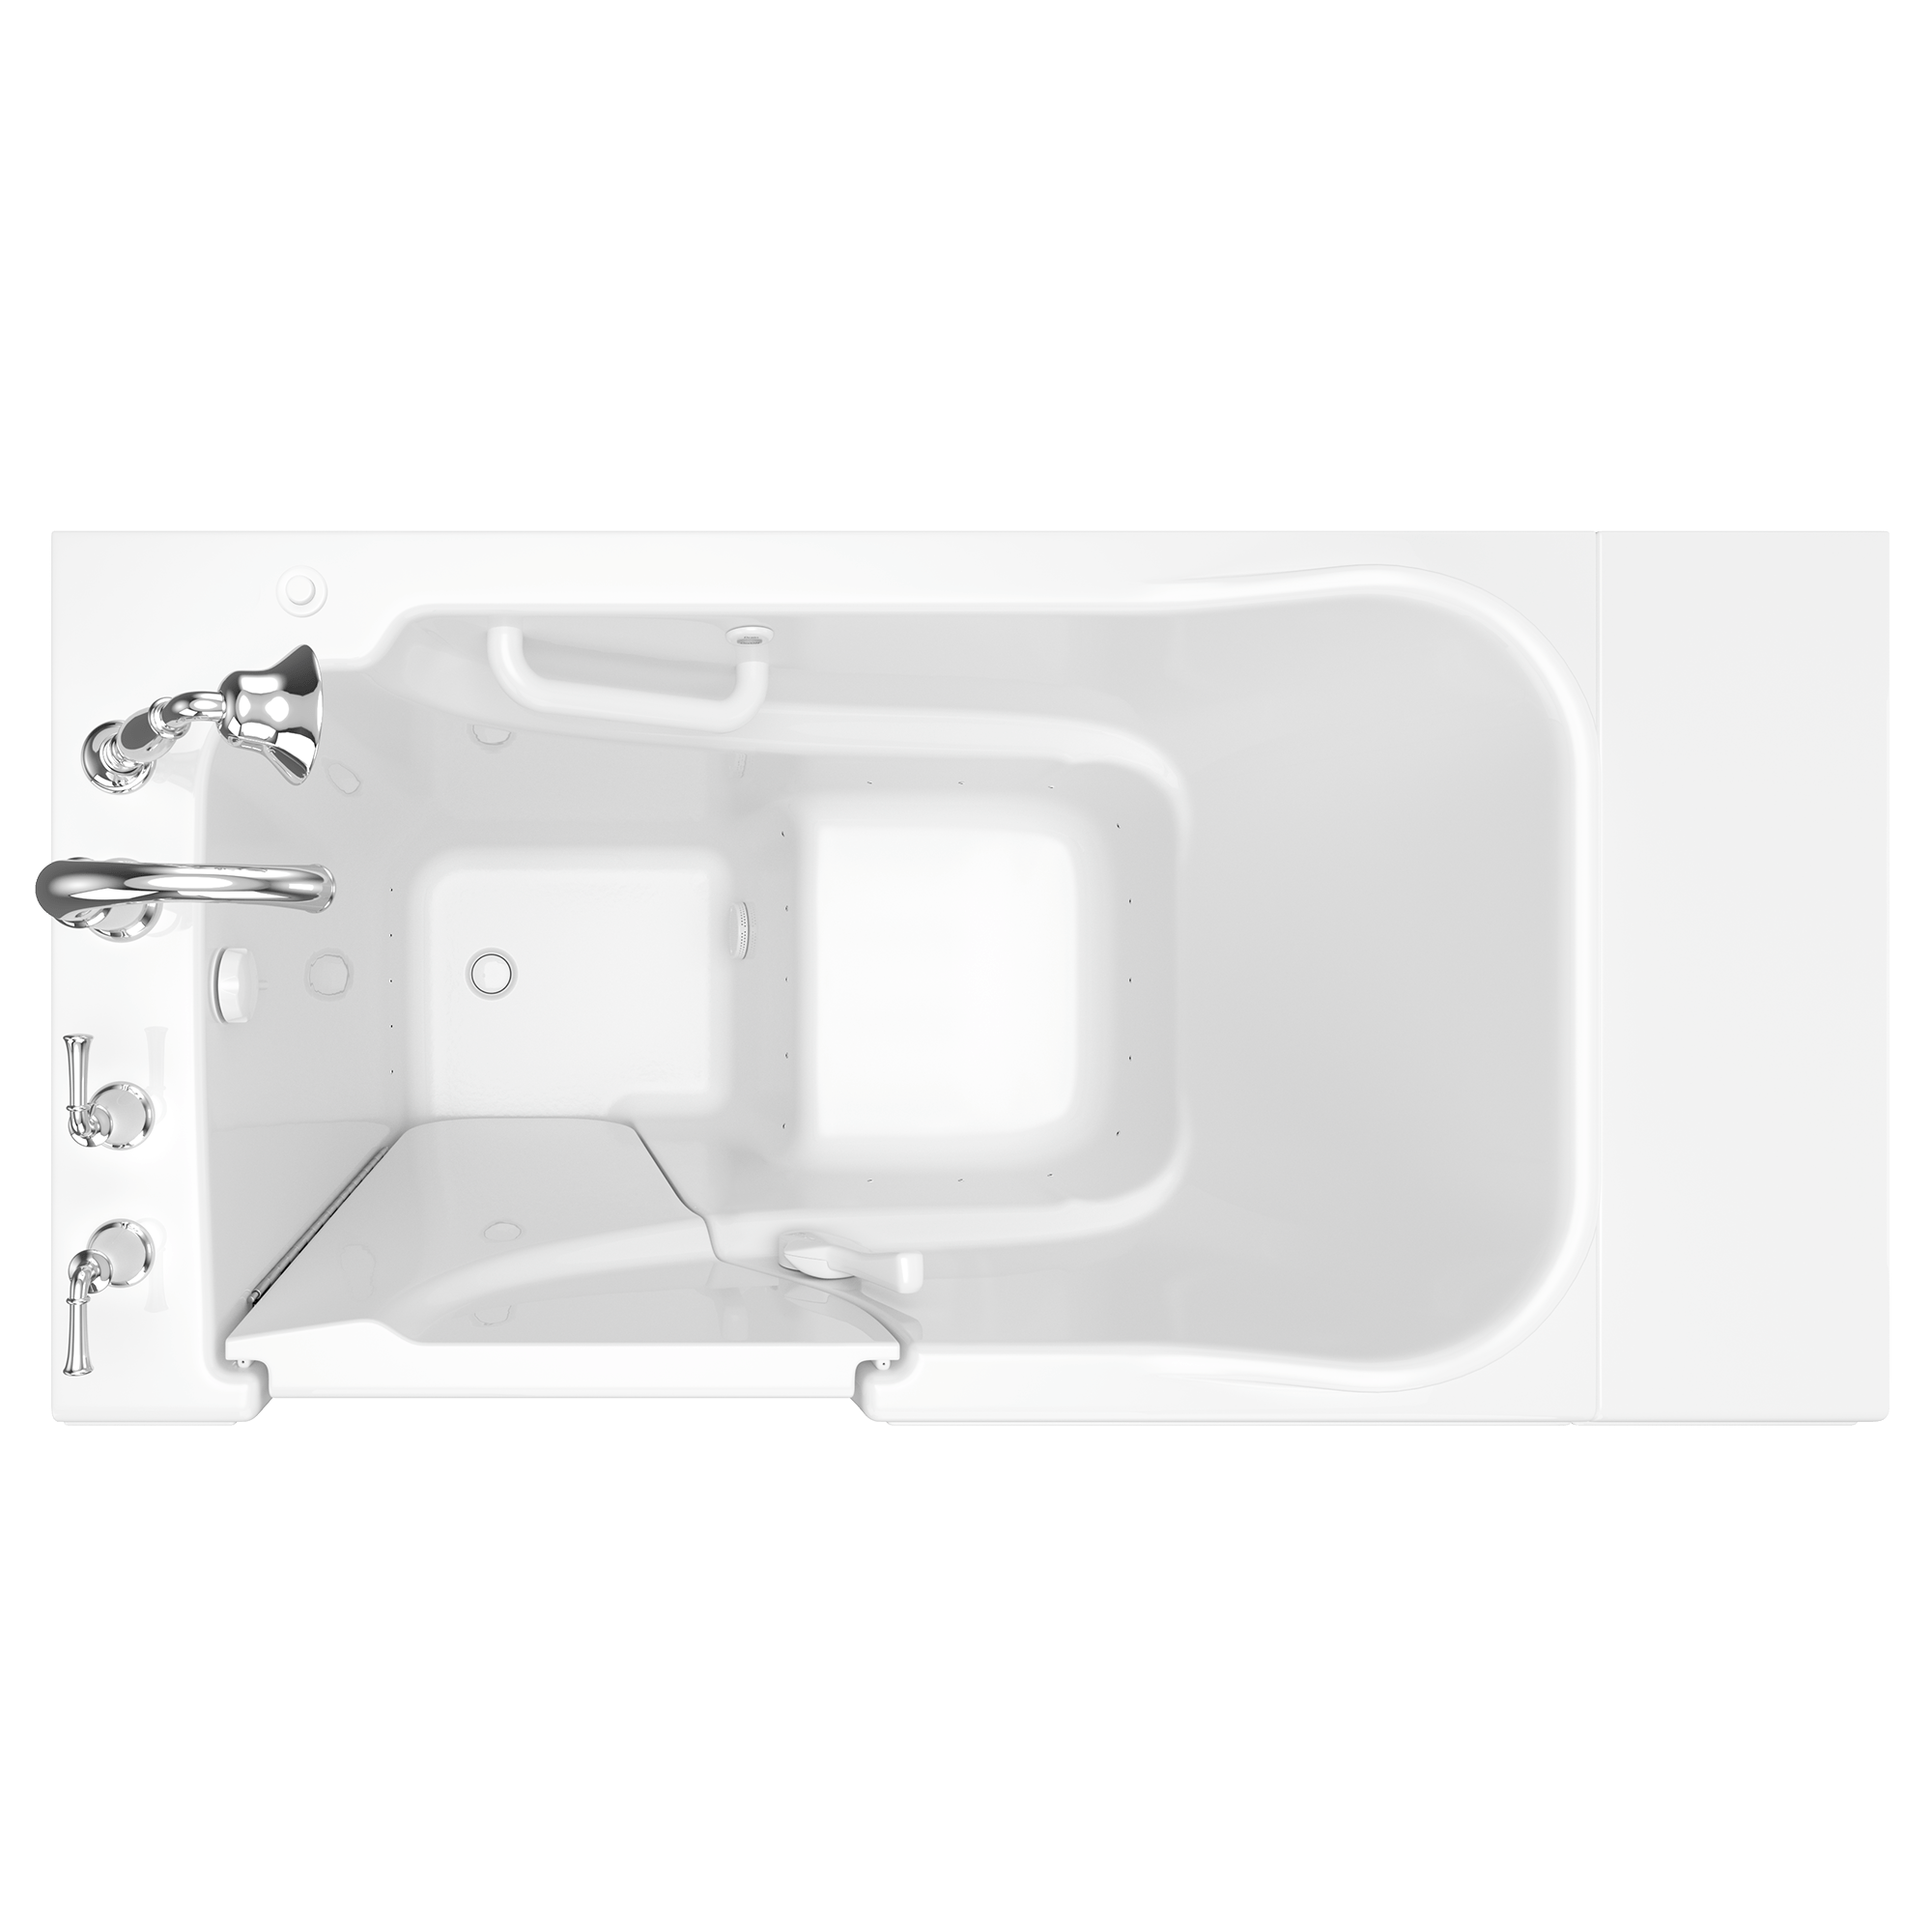 Gelcoat Value Series 30x52 Inch Walk-In Bathtub with Air Spa System - Left Hand Door and Drain